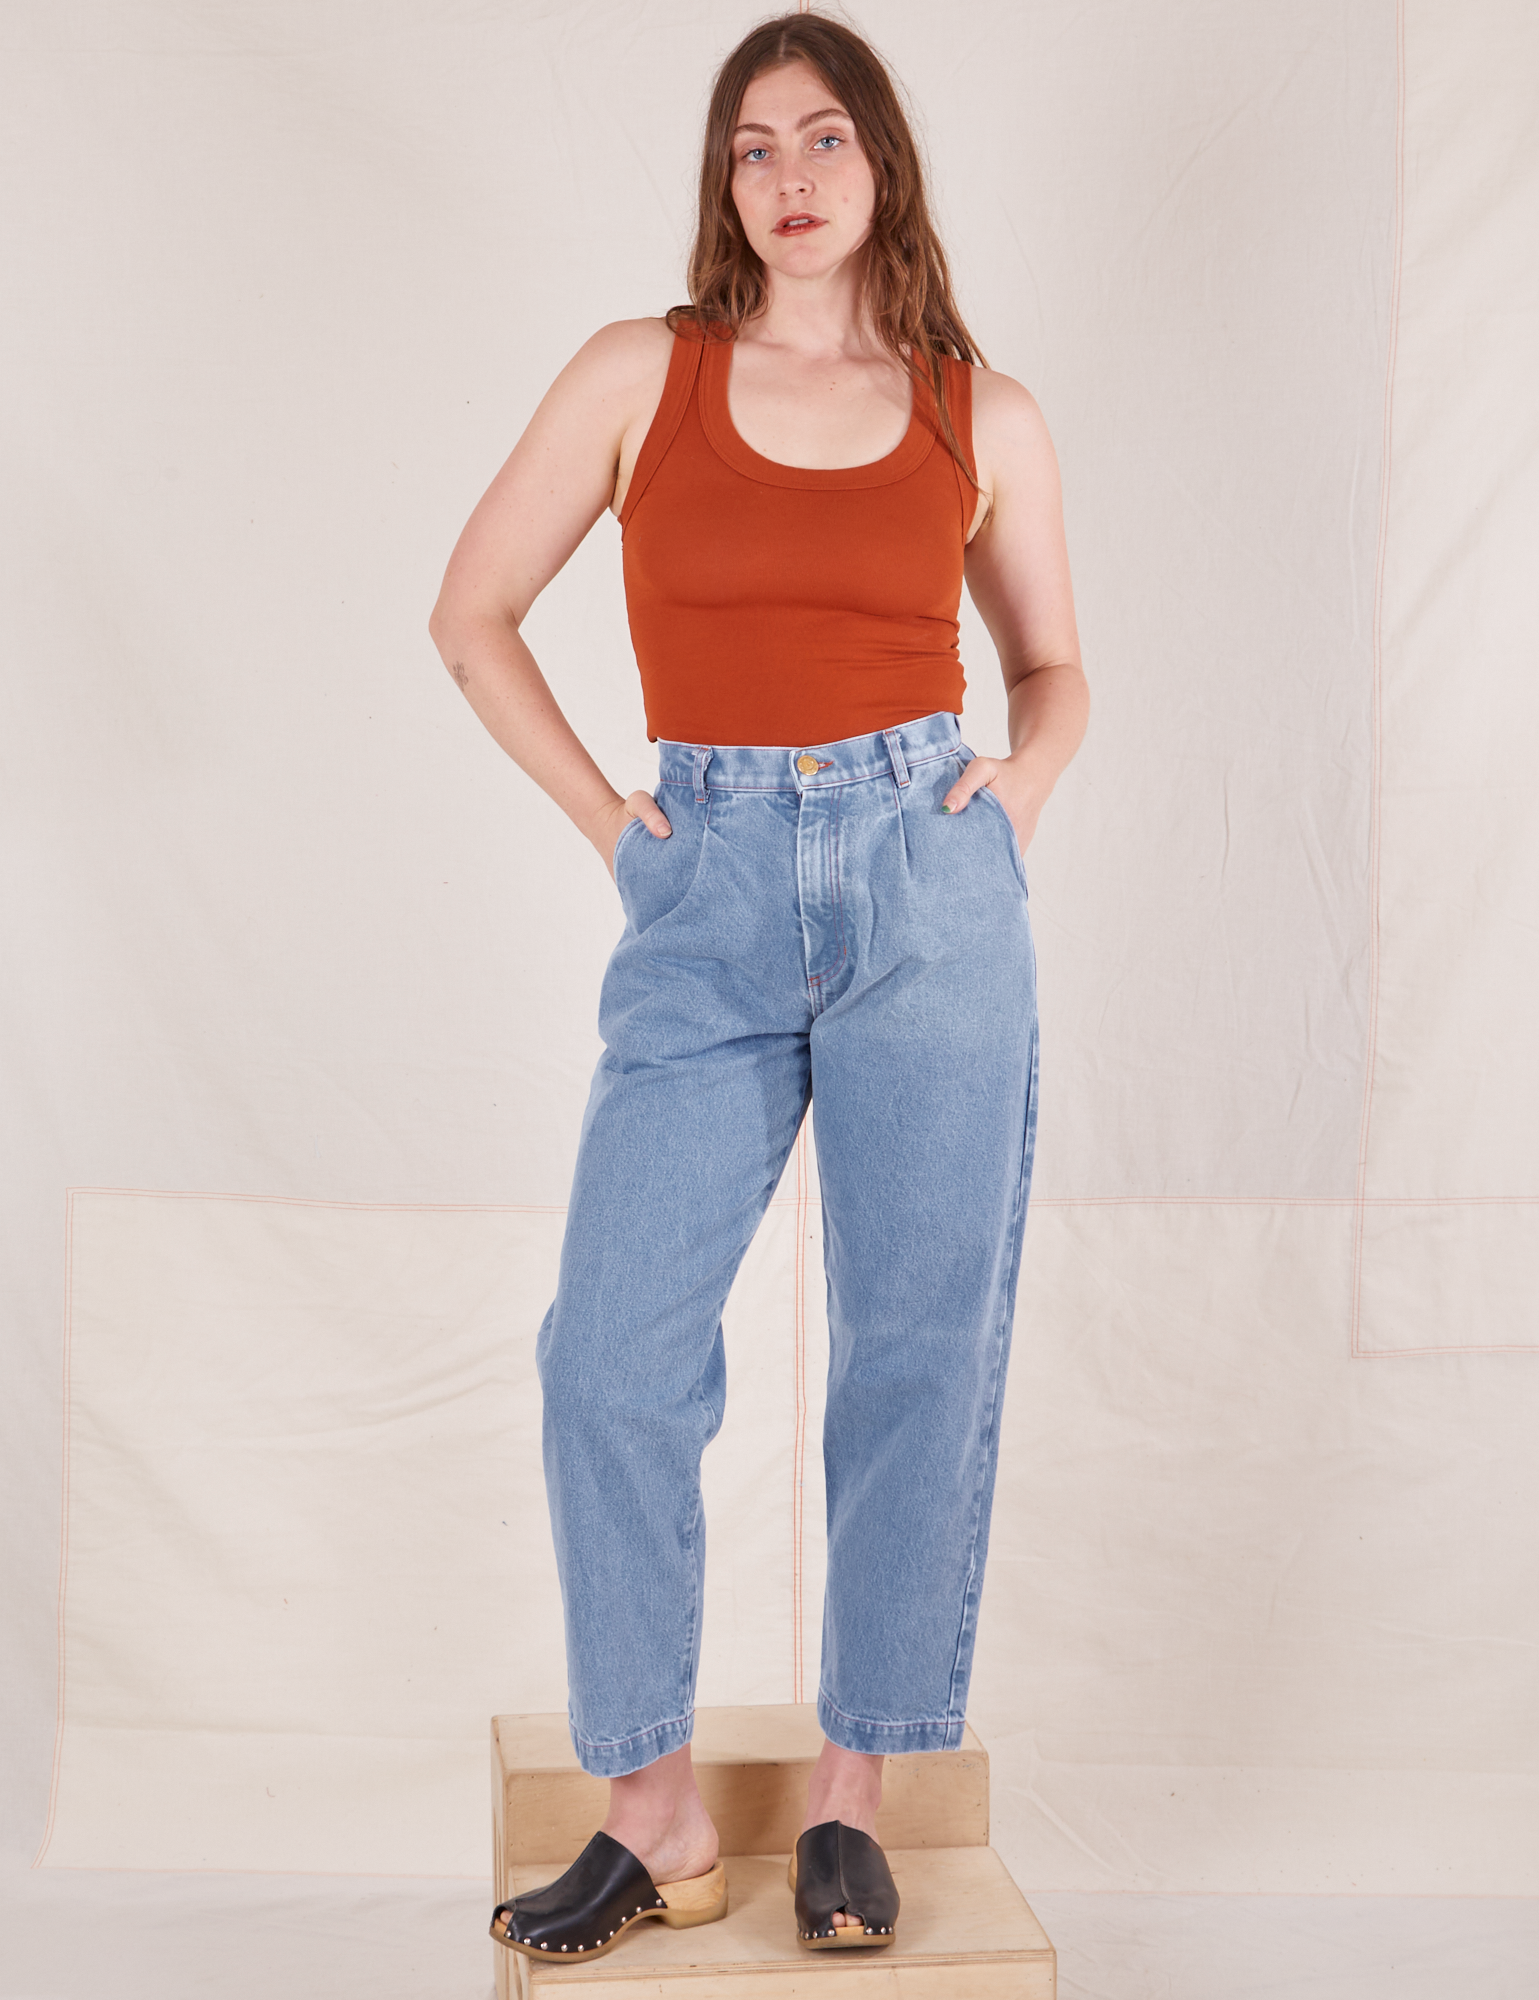 Allison is 5&#39;10&quot; and wearing XS Denim Trouser Jeans in Light Wash paired with a burnt orange Tank Top